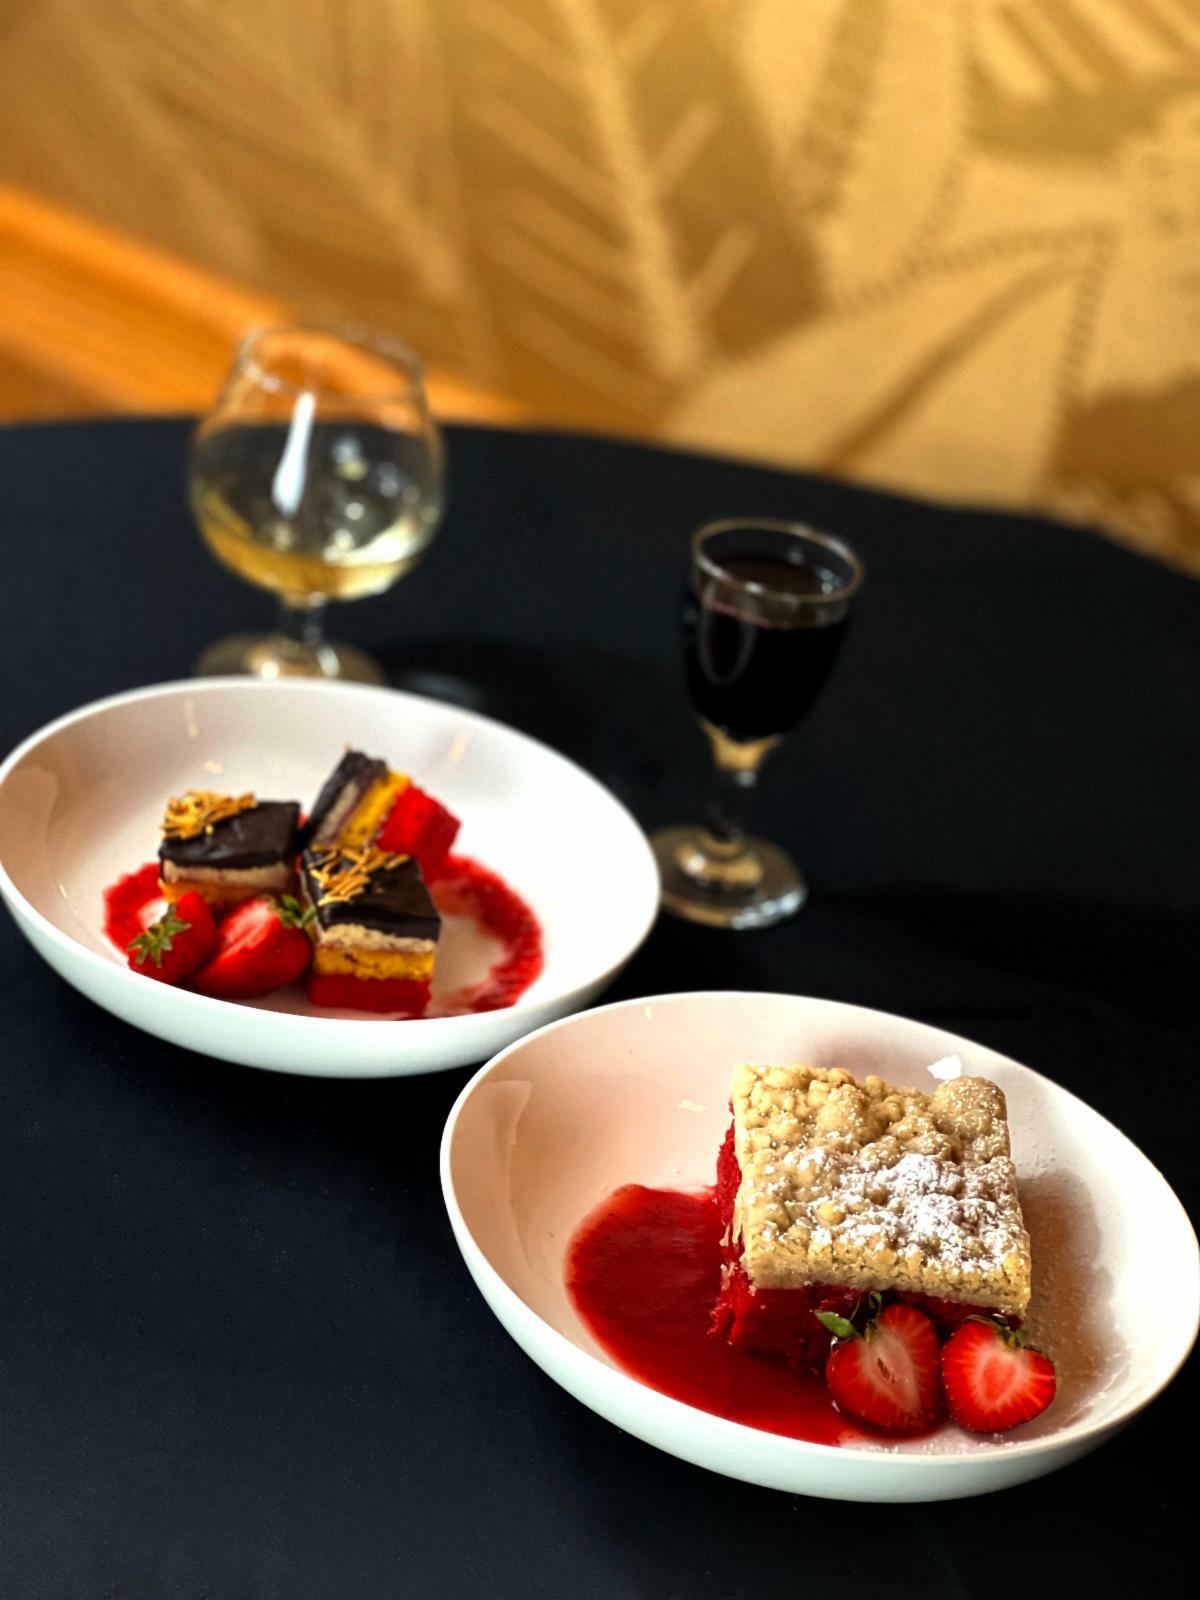 Small plates and desserts like Deco Cakes and The Suffolk Velvet are now available during shows at Suffolk Theater. COURTESY THE SUFFOLK